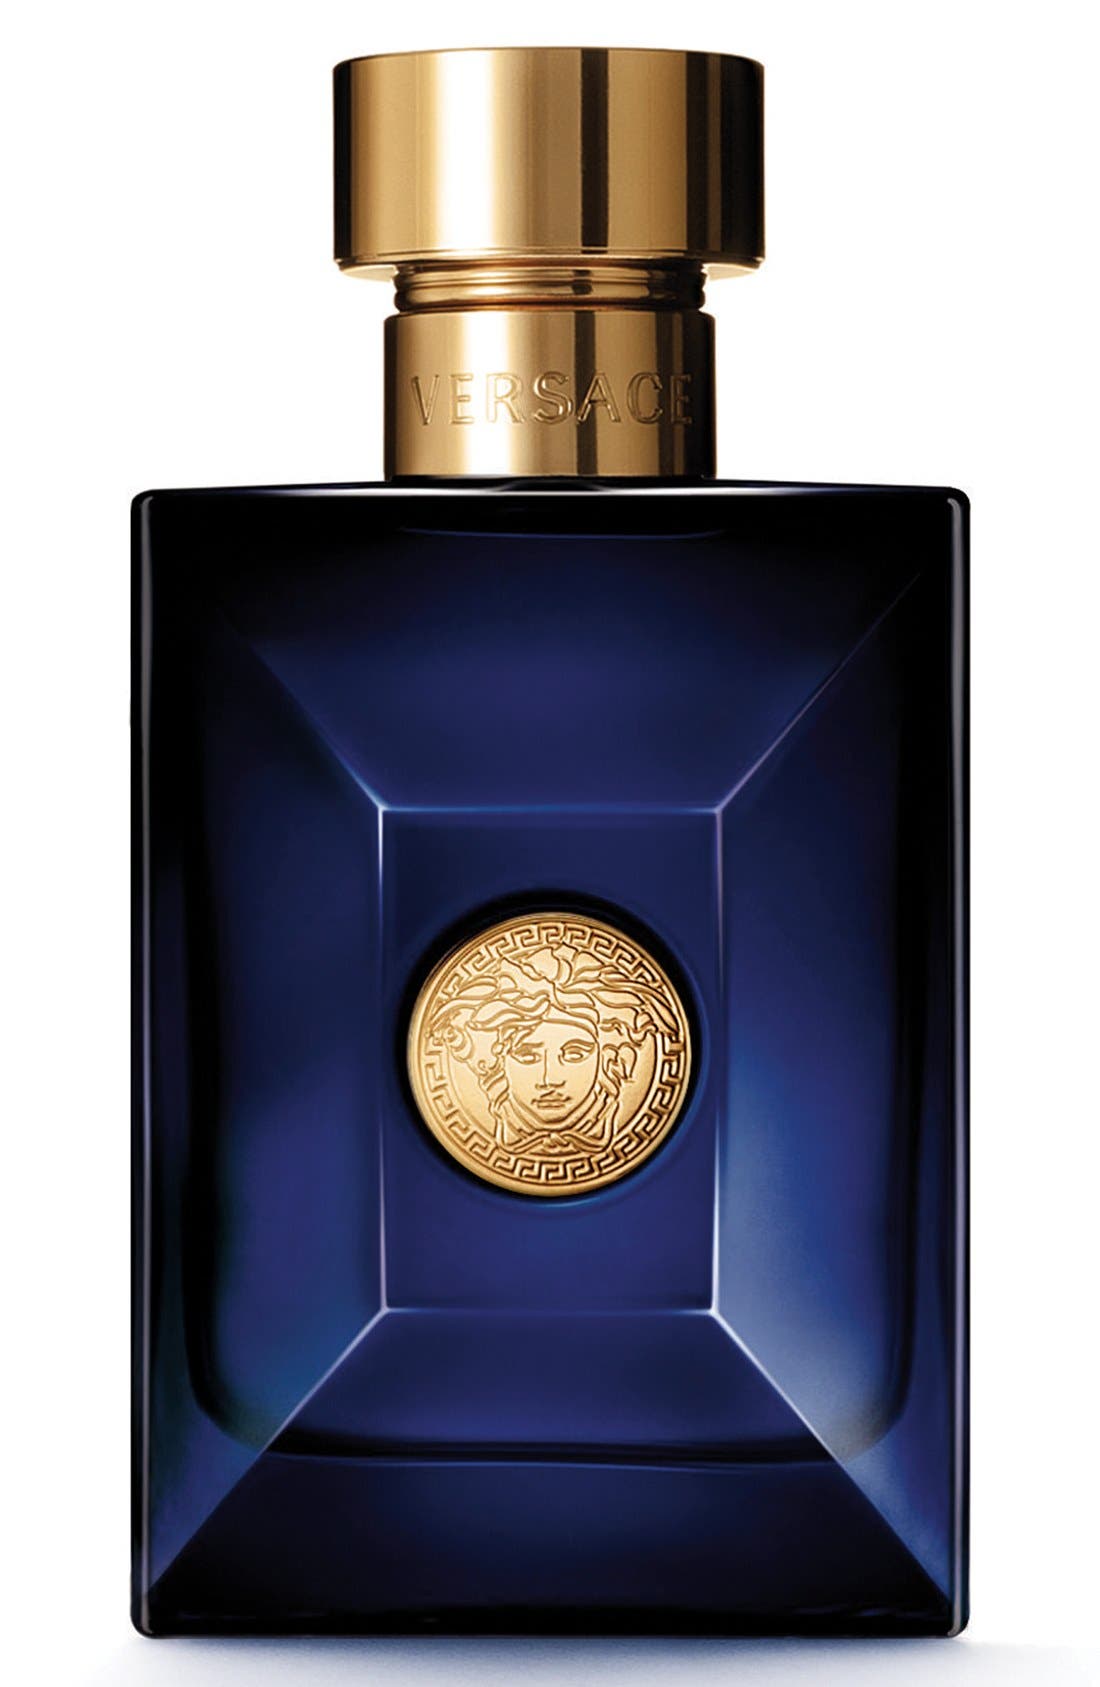 versace cologne black friday